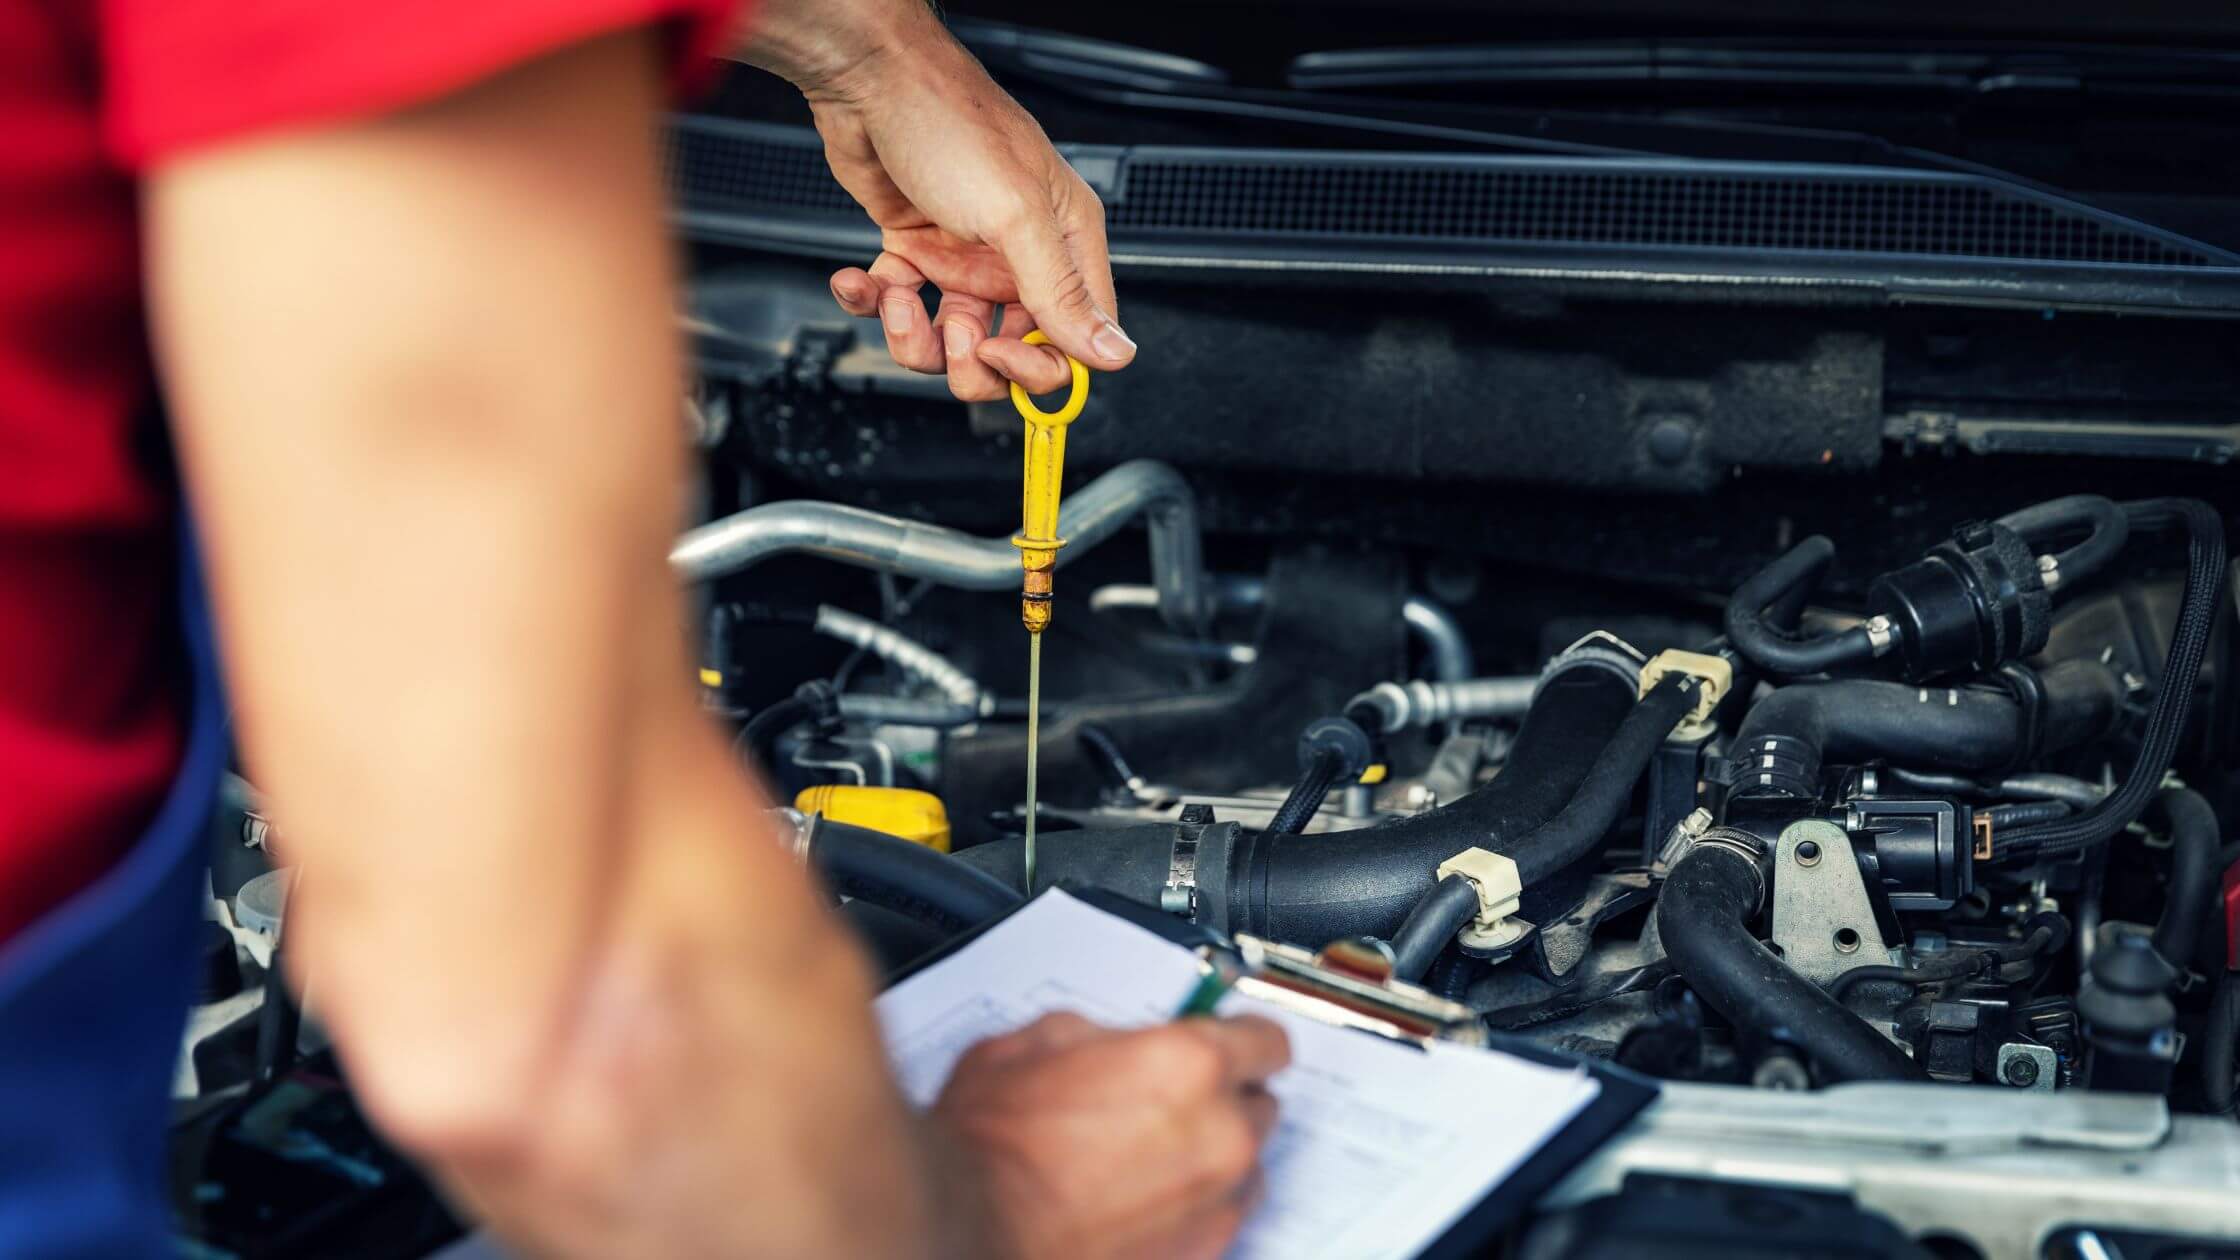 What Can a Car Diagnostic Test Tell You?